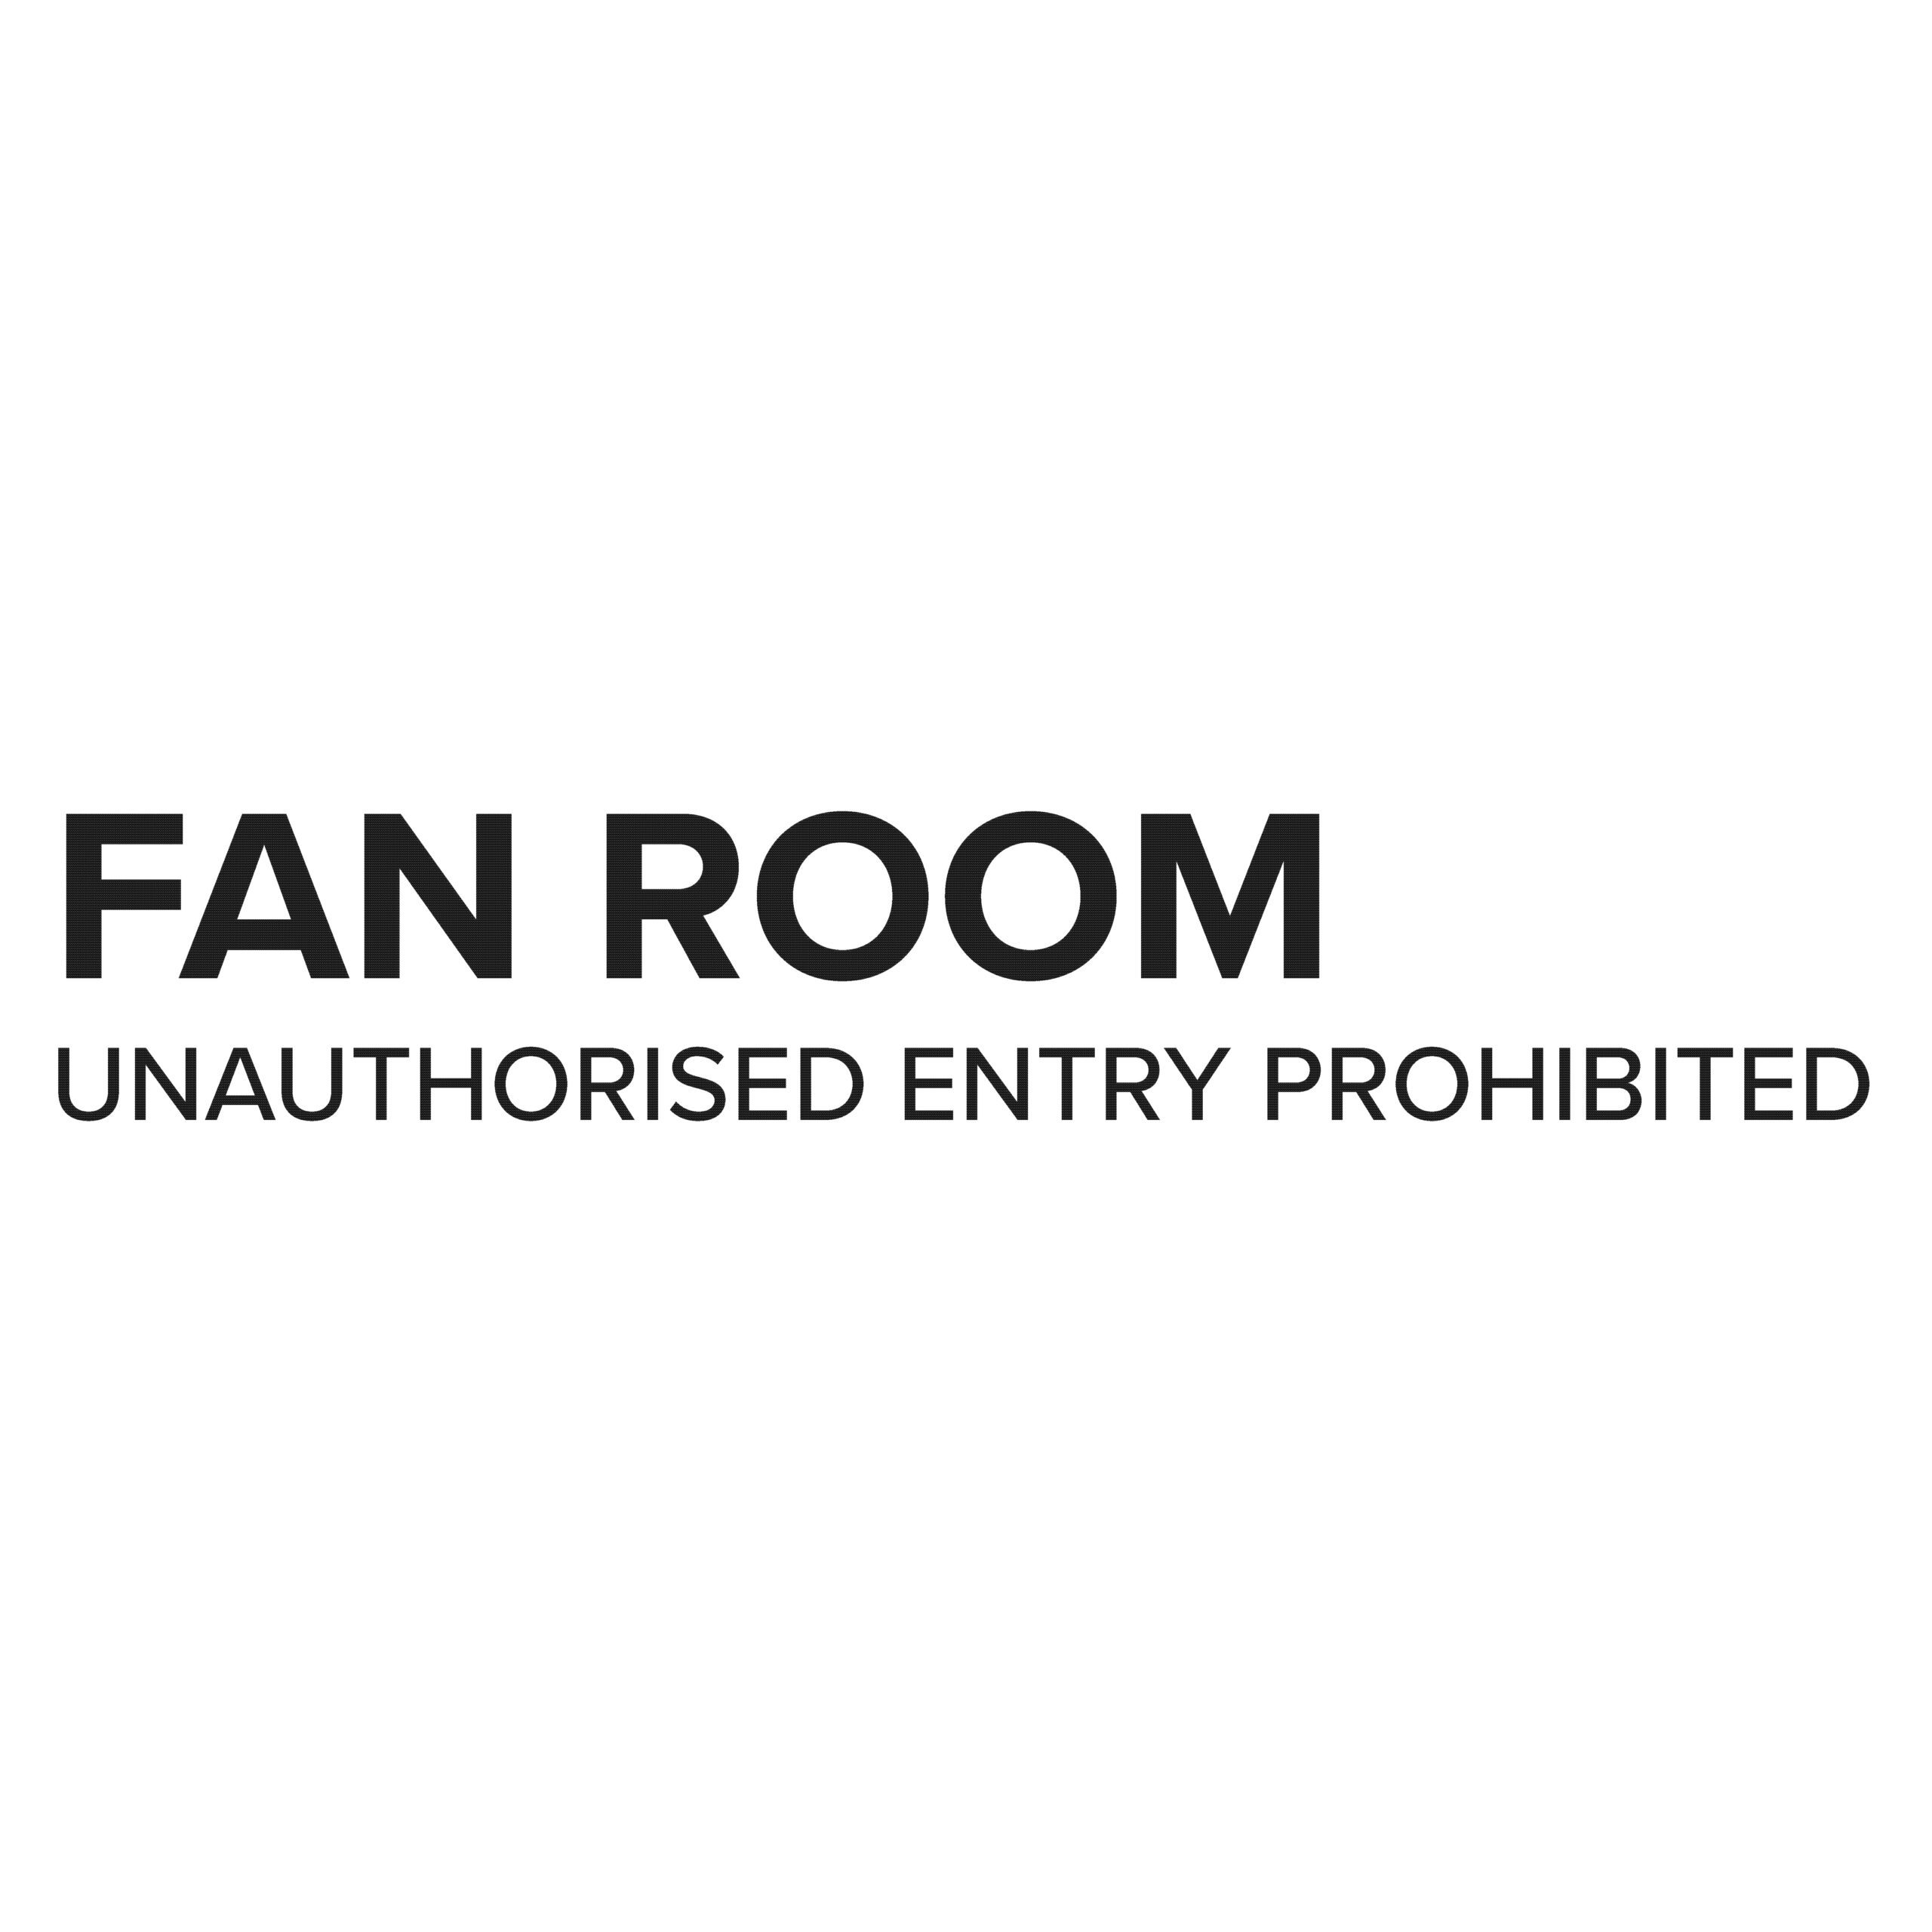 FAN ROOM SIGNS scaled